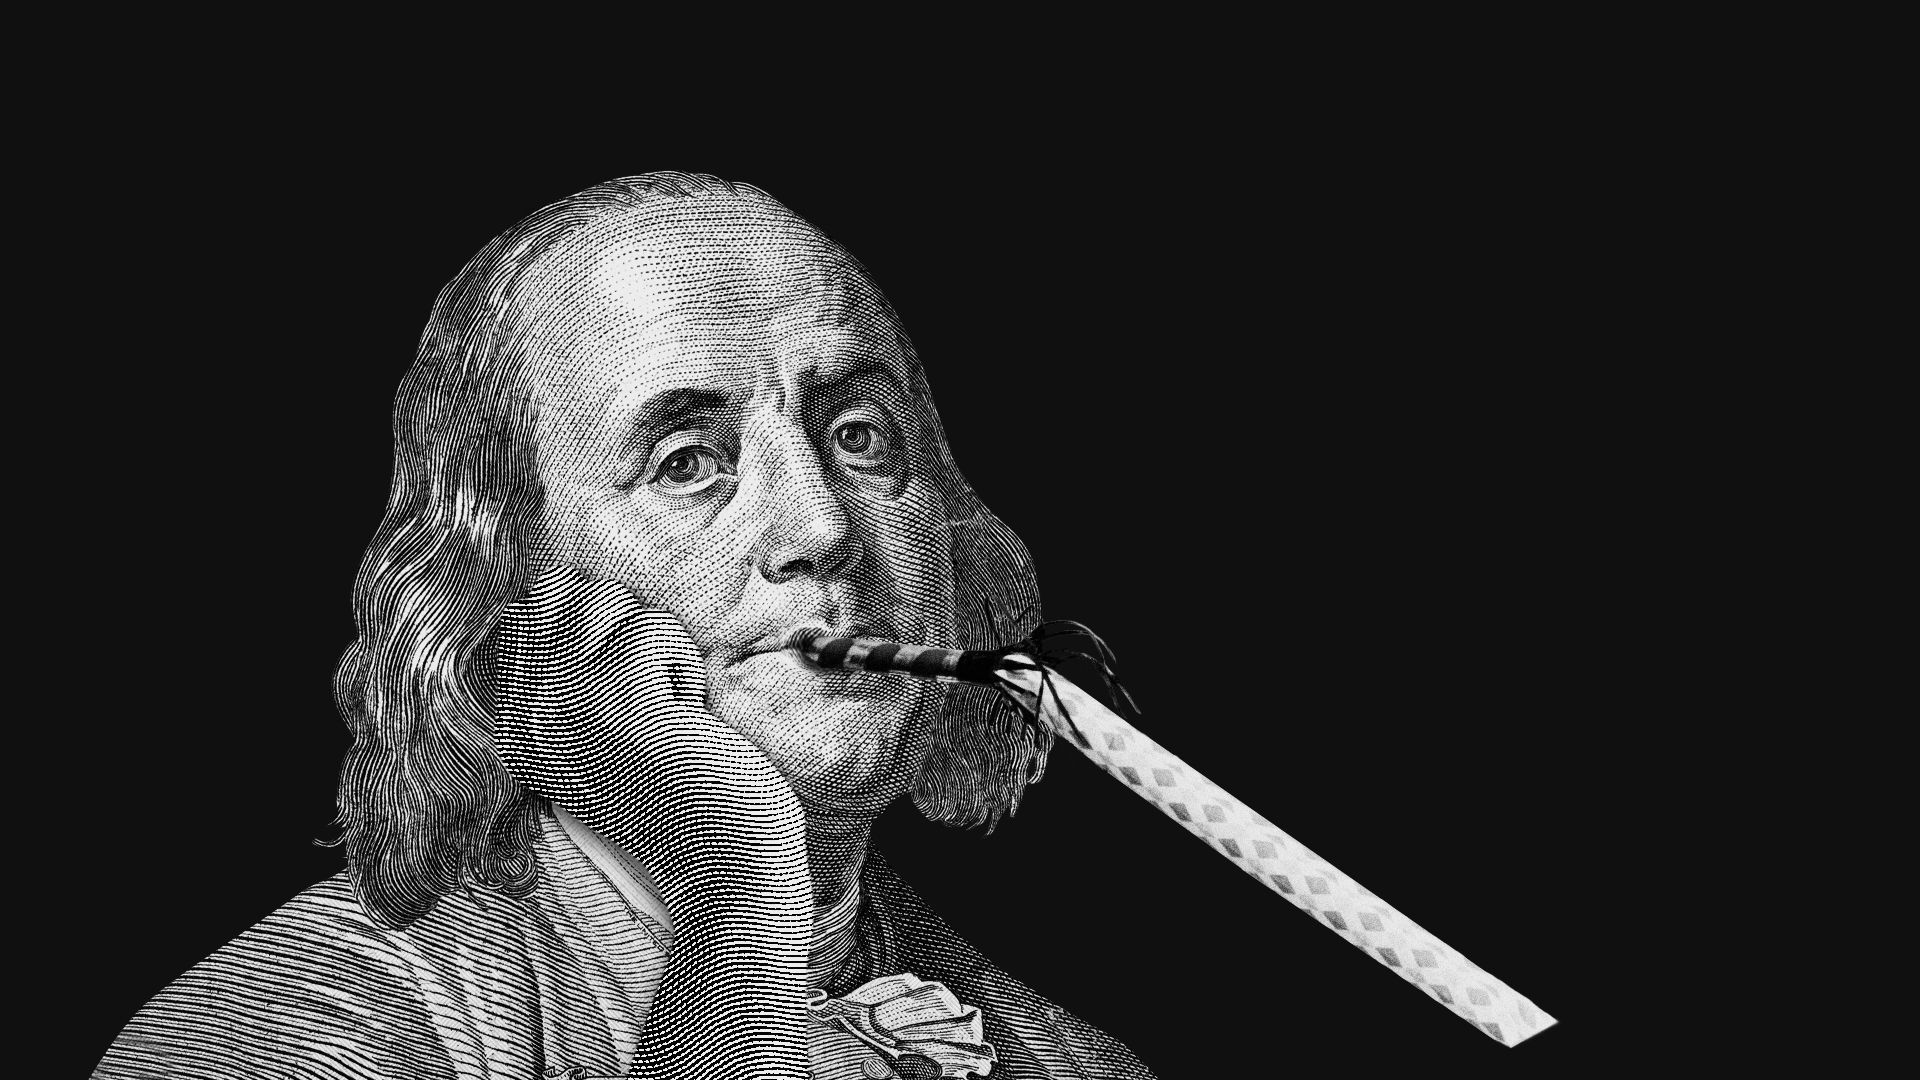 Illustration of Benjamin Franklin resting his head on his hand and blowing a party horn